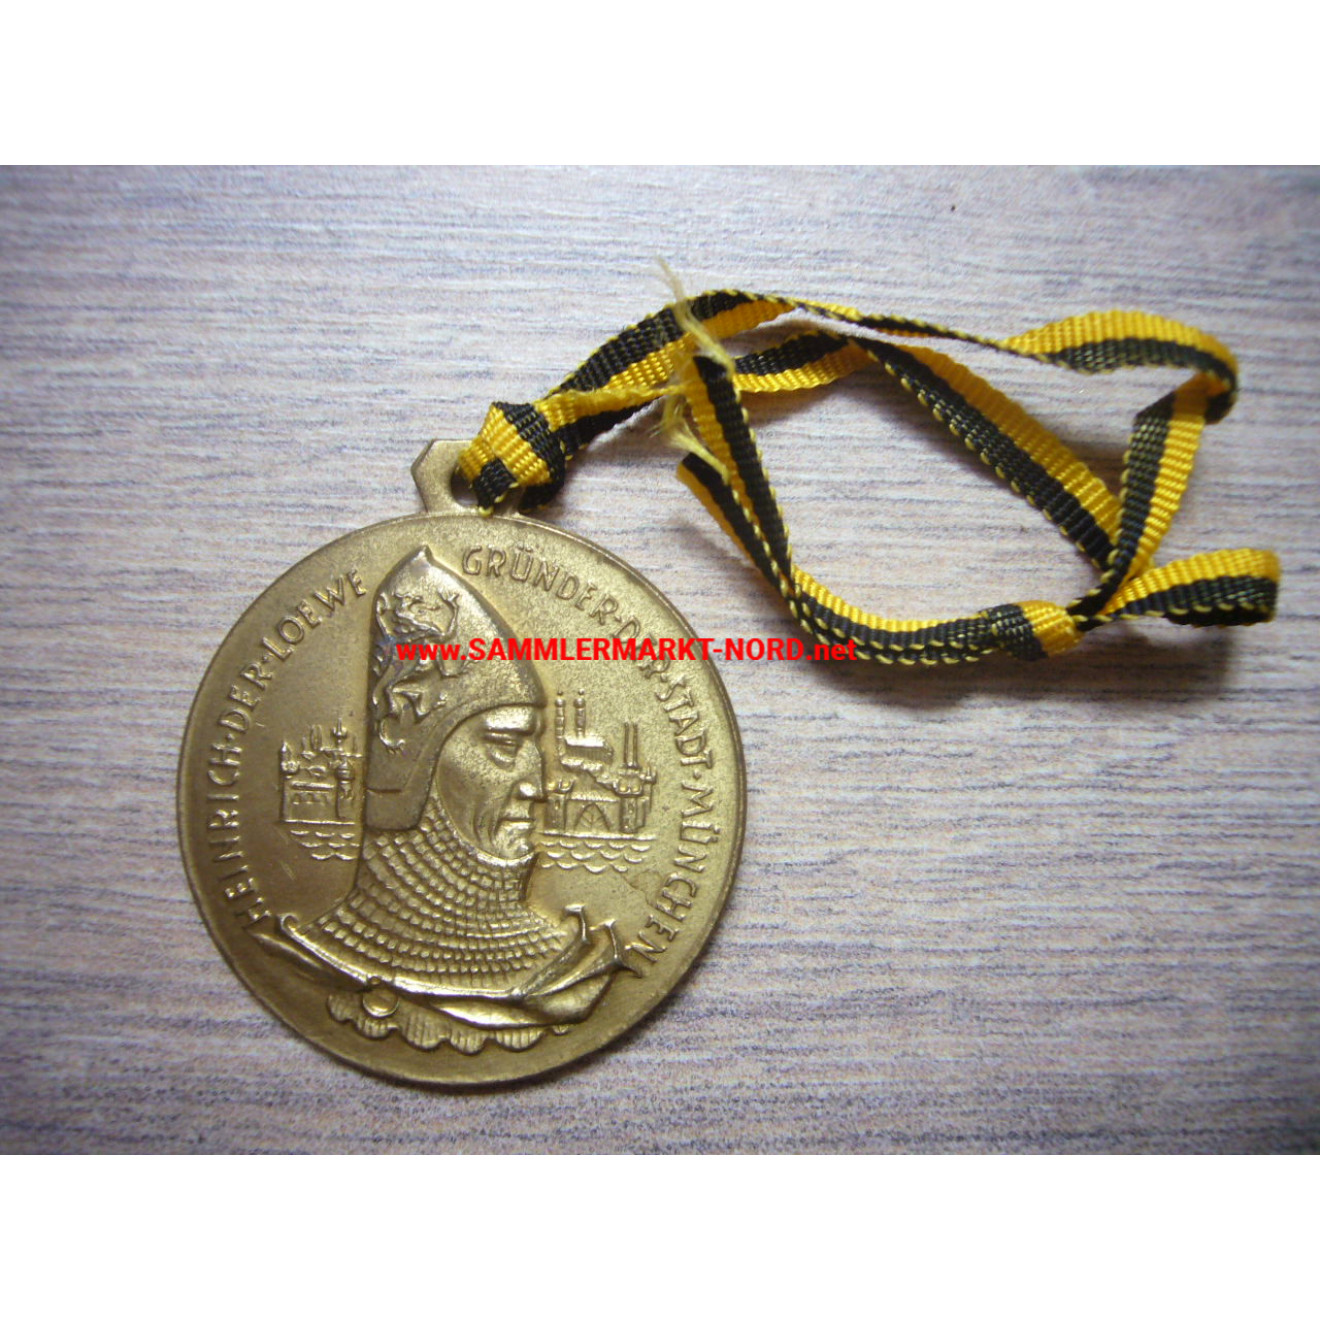 800 Years of the City of Munich 1158 - 1958 - Commemorative Medal